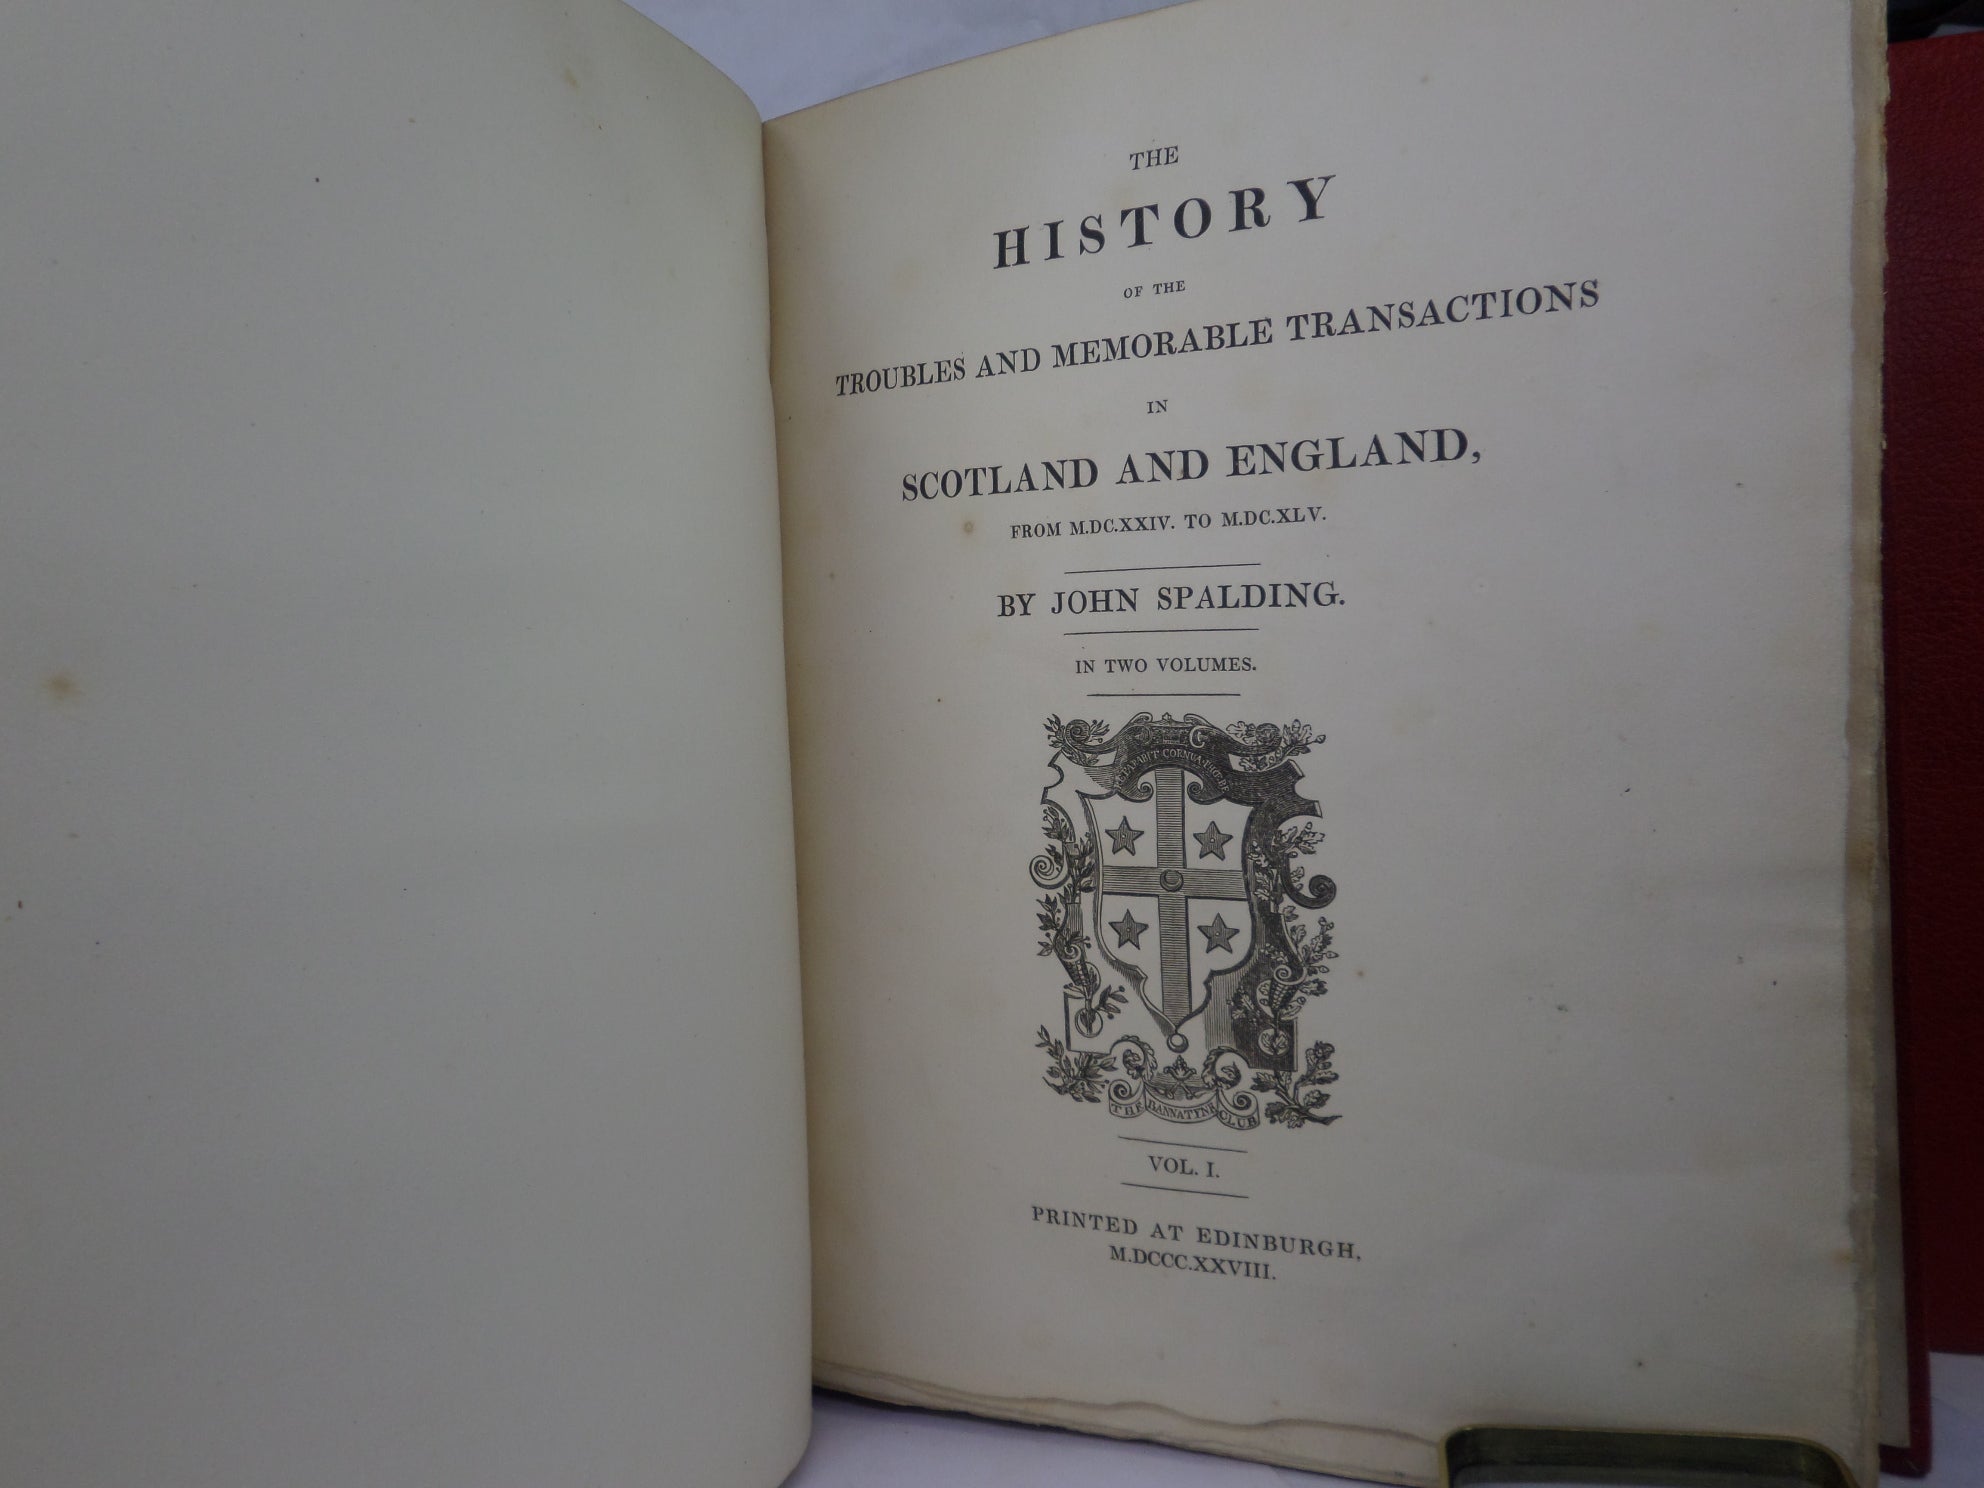 THE HISTORY OF THE TROUBLES & MEMORABLE TRANSACTIONS IN SCOTLAND & ENGLAND 1828